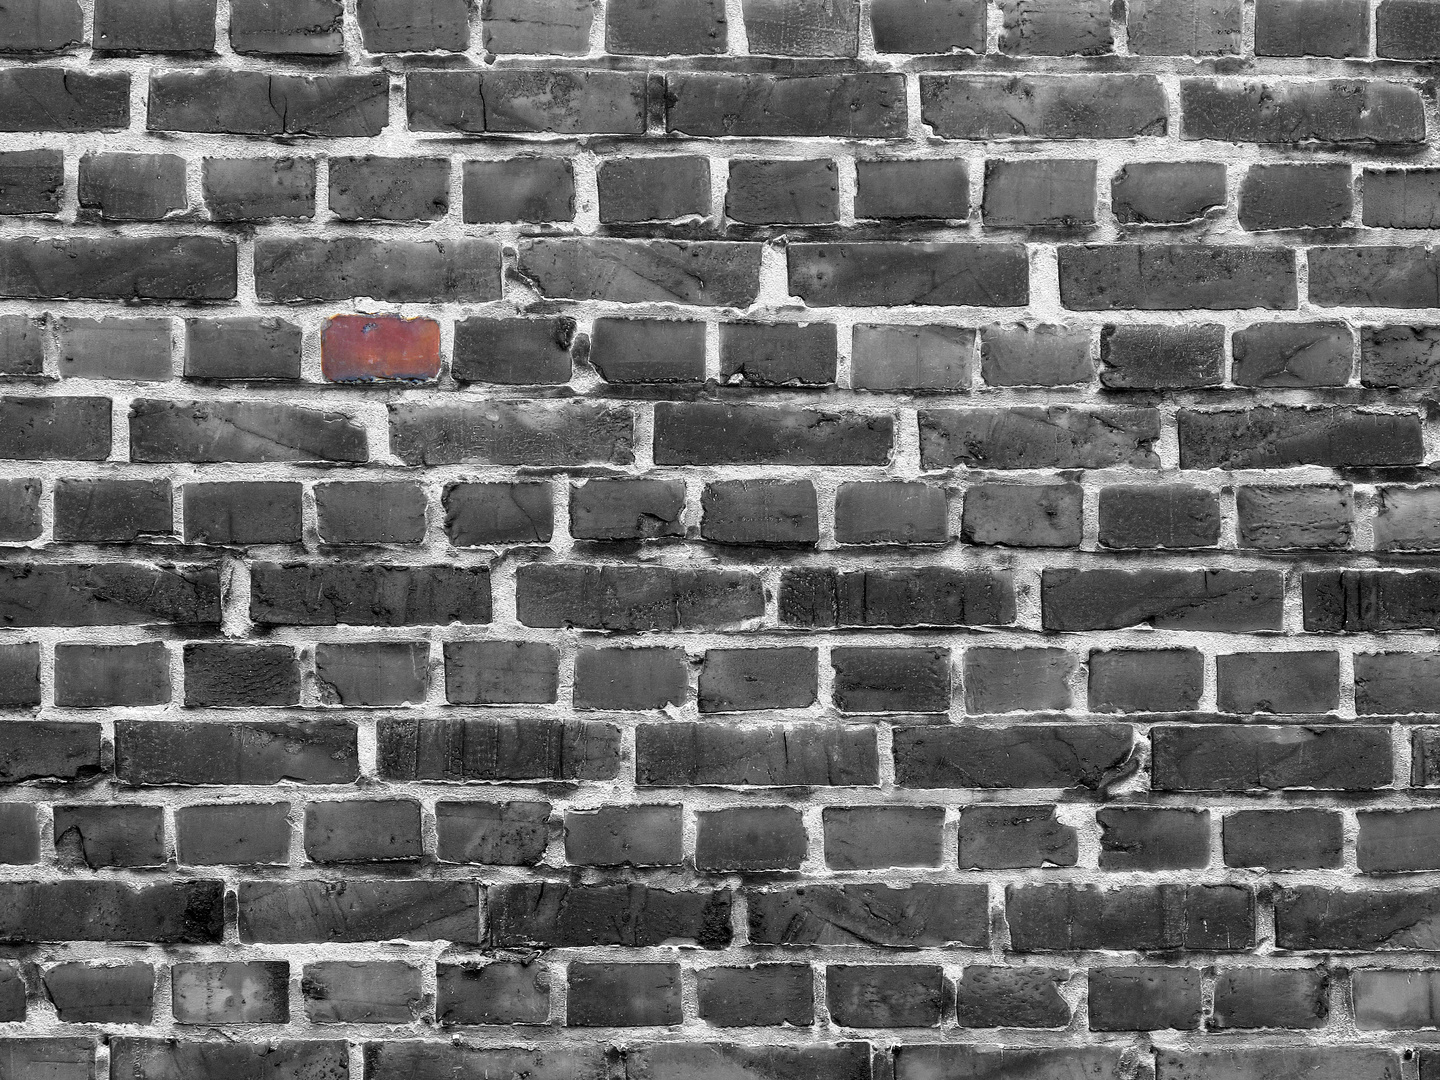 „Another Brick in the Wall“